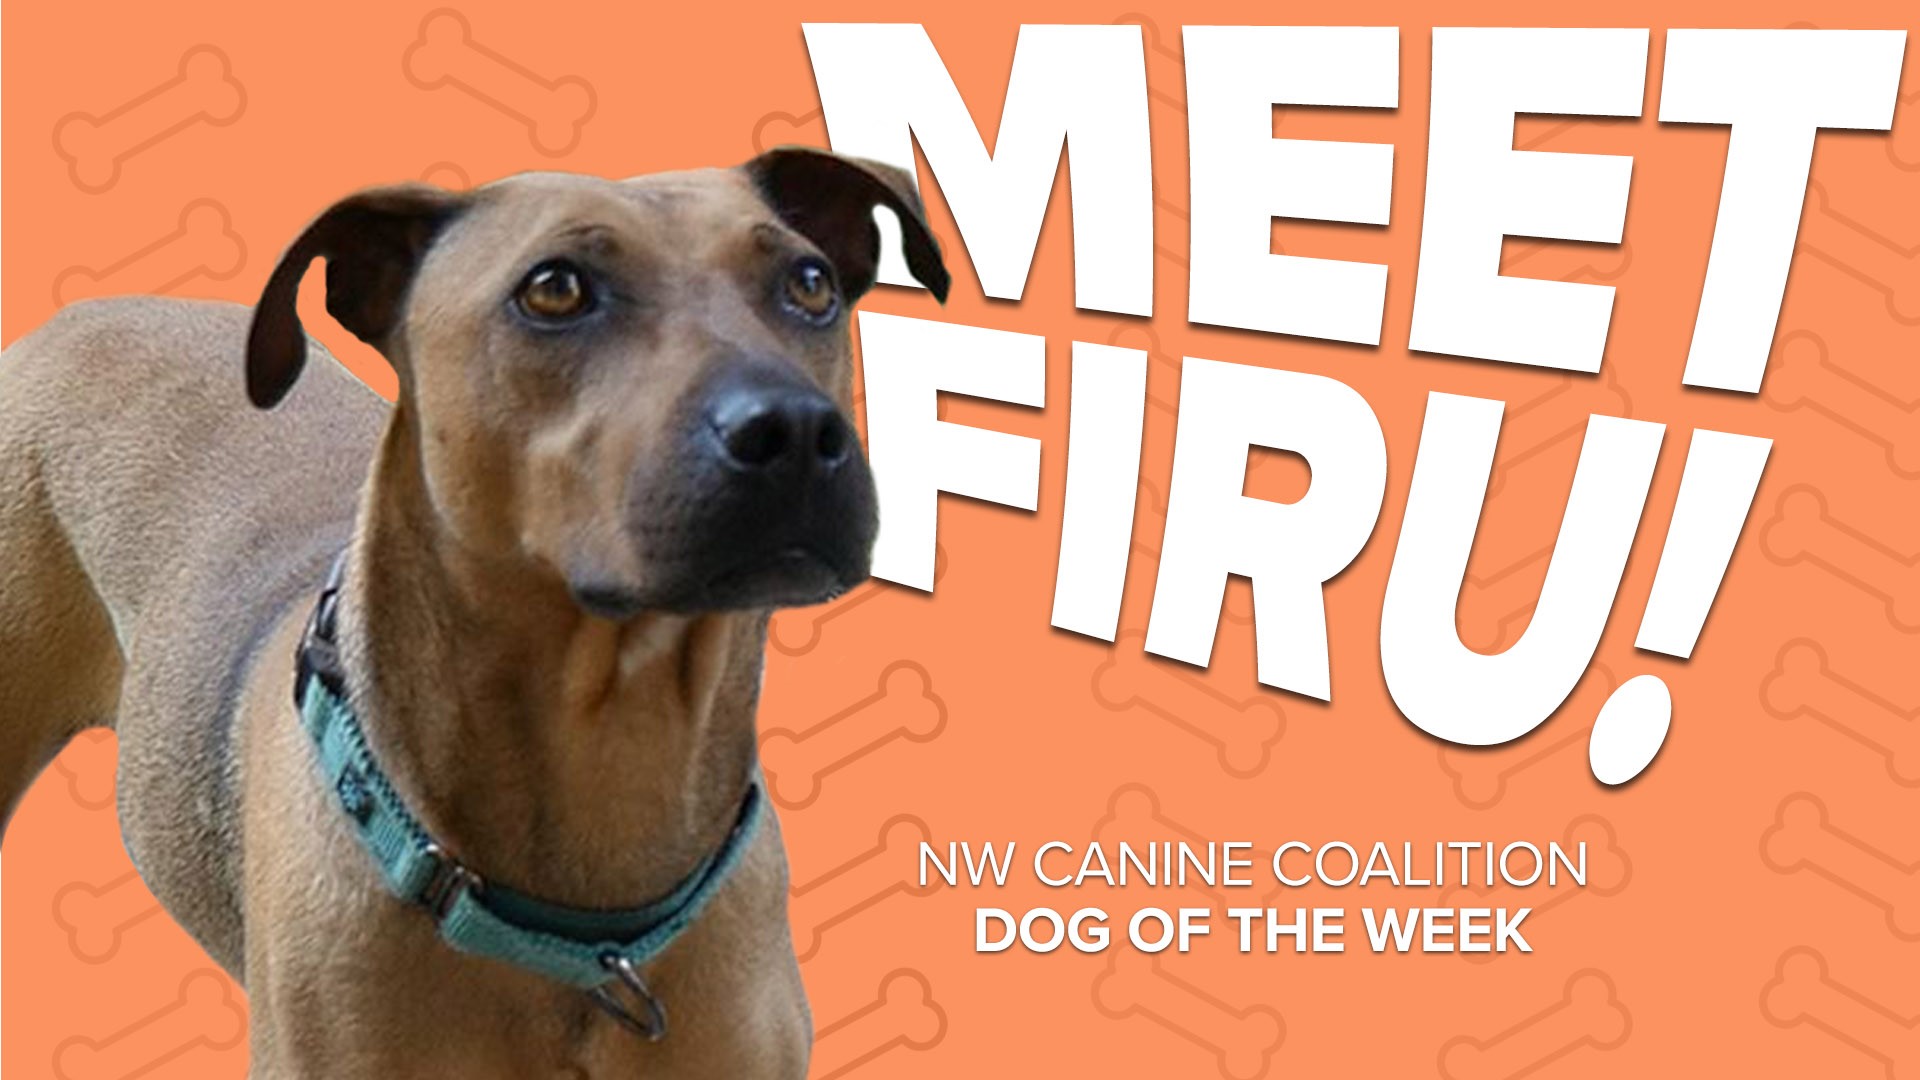 This week's canine of the week is Firu!  Firu is great with other dogs and loves the water.